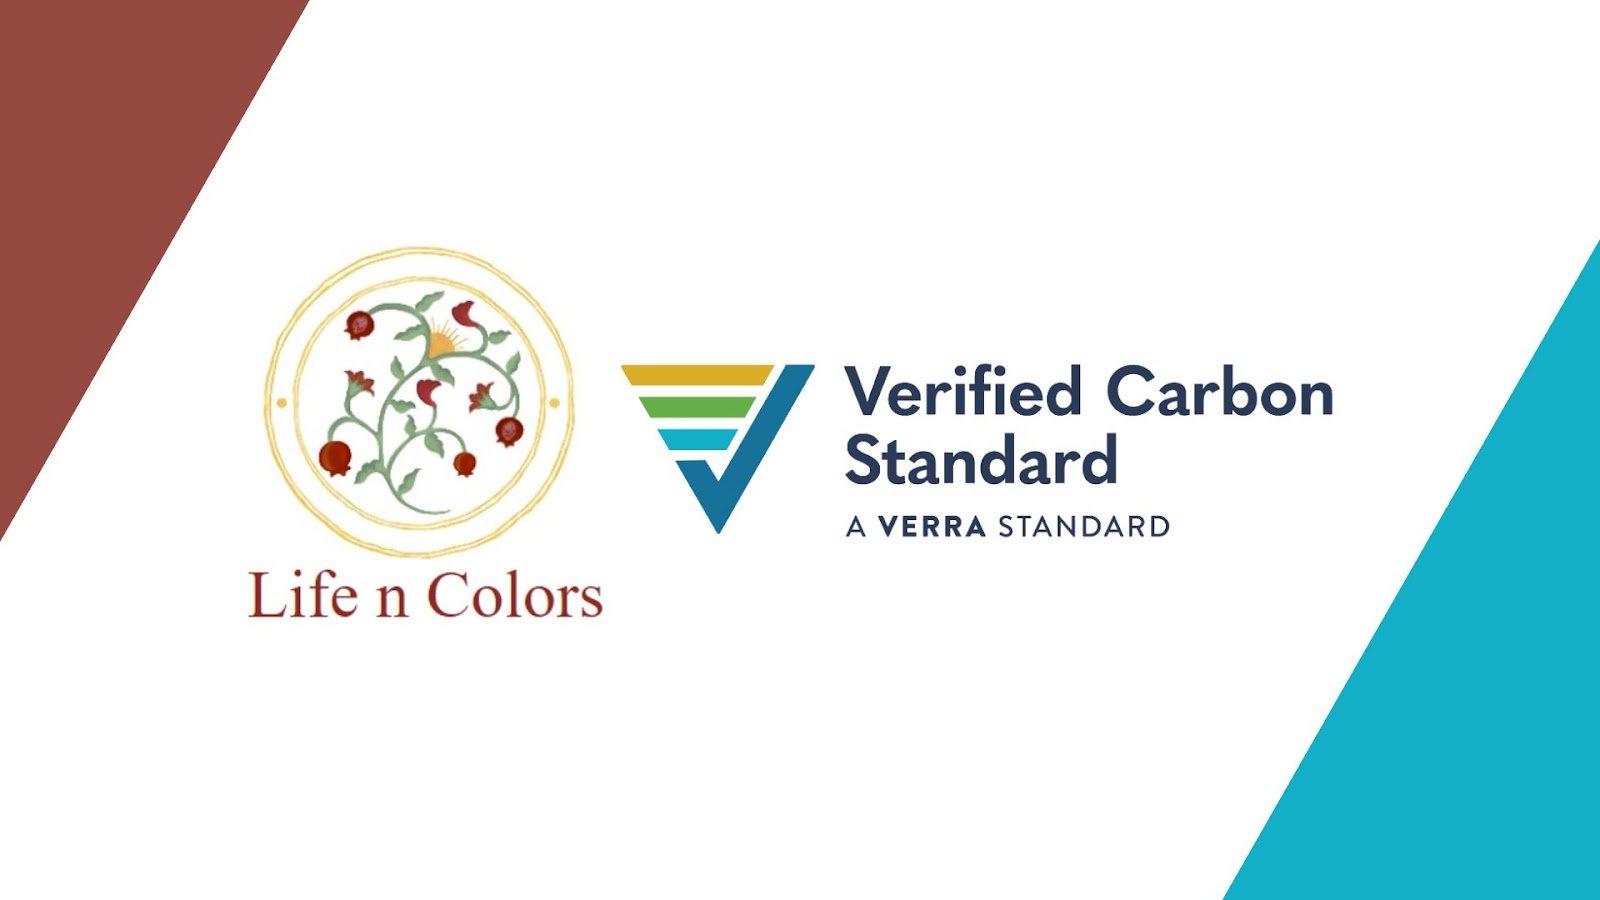 Life n Colors: Setting New Industry Standards with Carbon-Neutral Home Decor